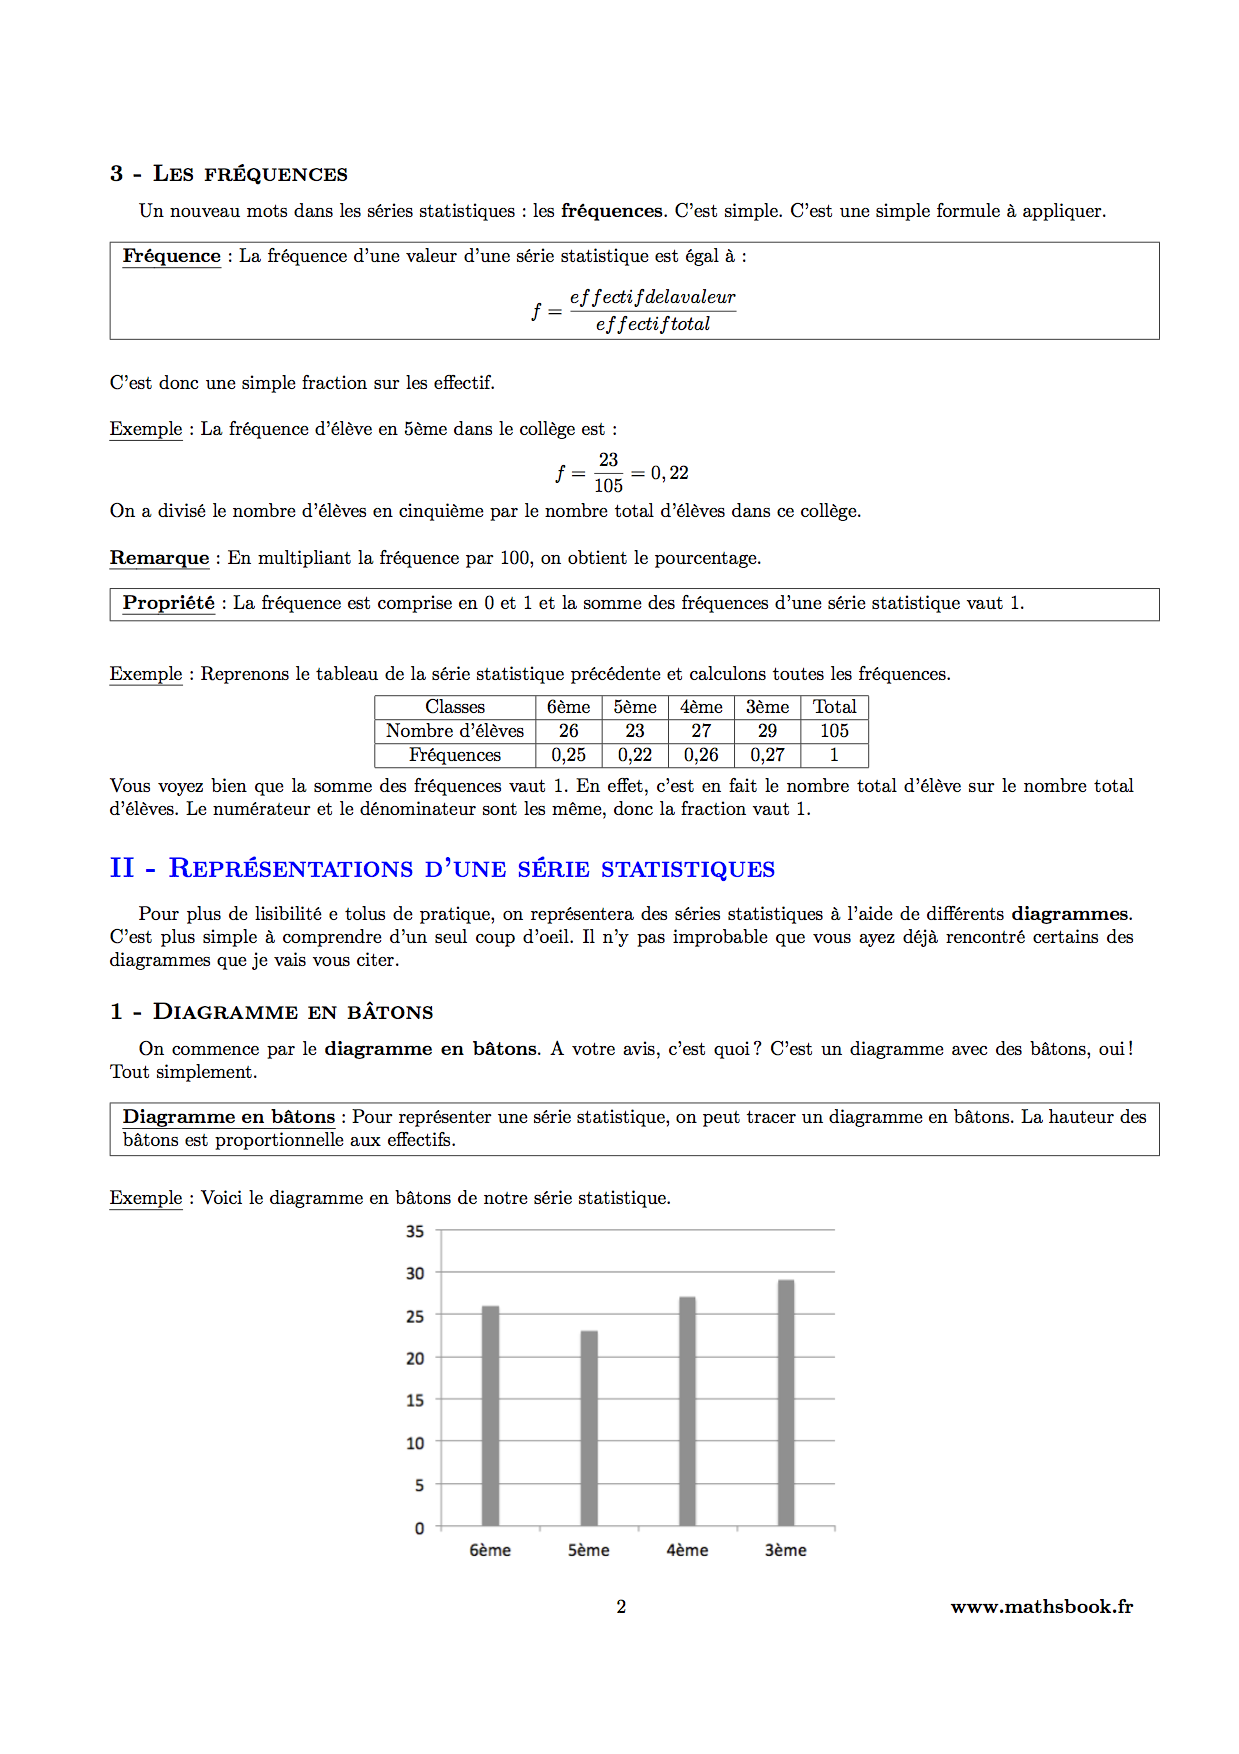 statistiques frequence diagramme en batons